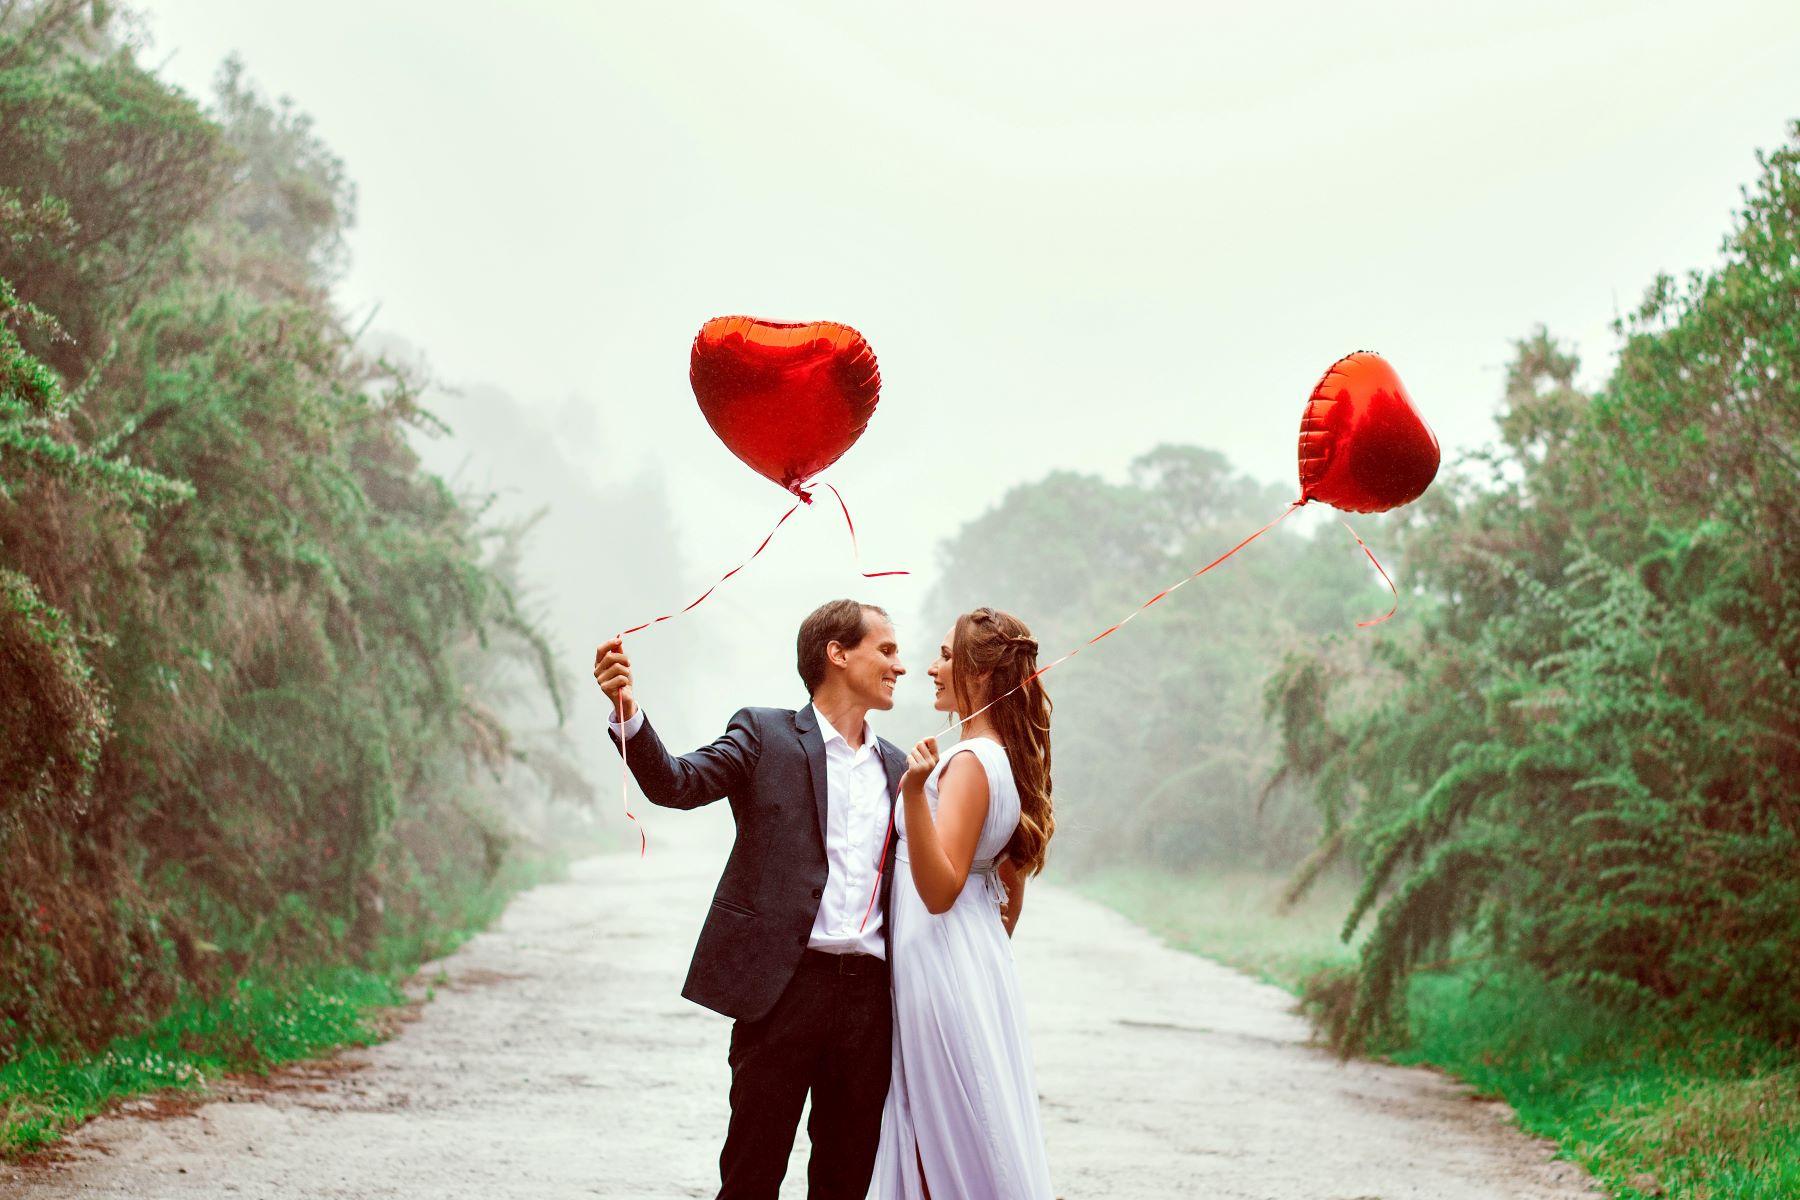 A couple getting married while holding red heart balloons in their hands. | Source: Pexels